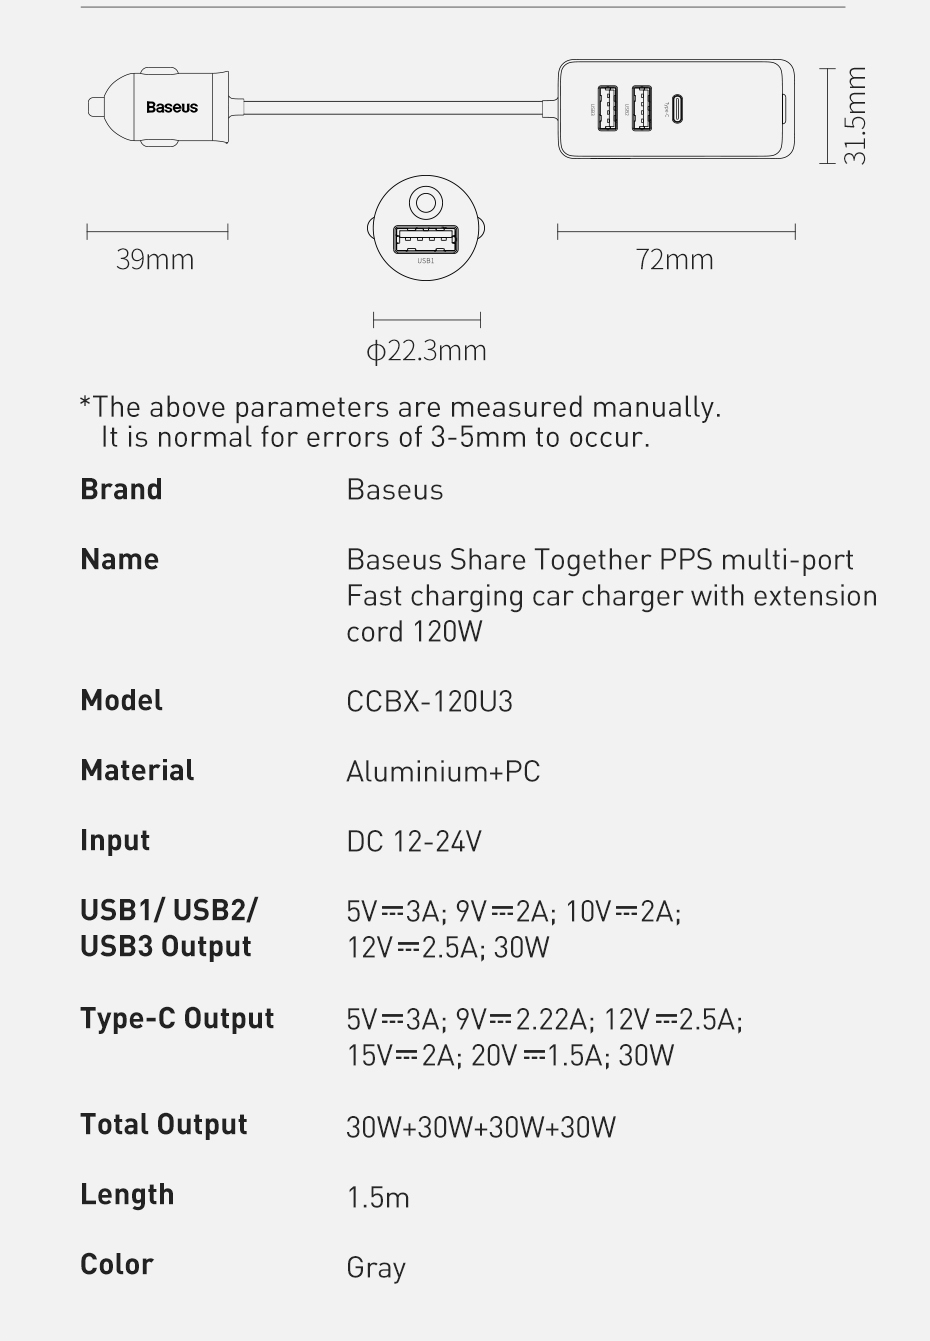 Baseus 120W 4-Port 2 USB + 2 Type-C Car Charger PPS PD QC3.0 FCP AFC Fast Charging 1.5m Long Cable